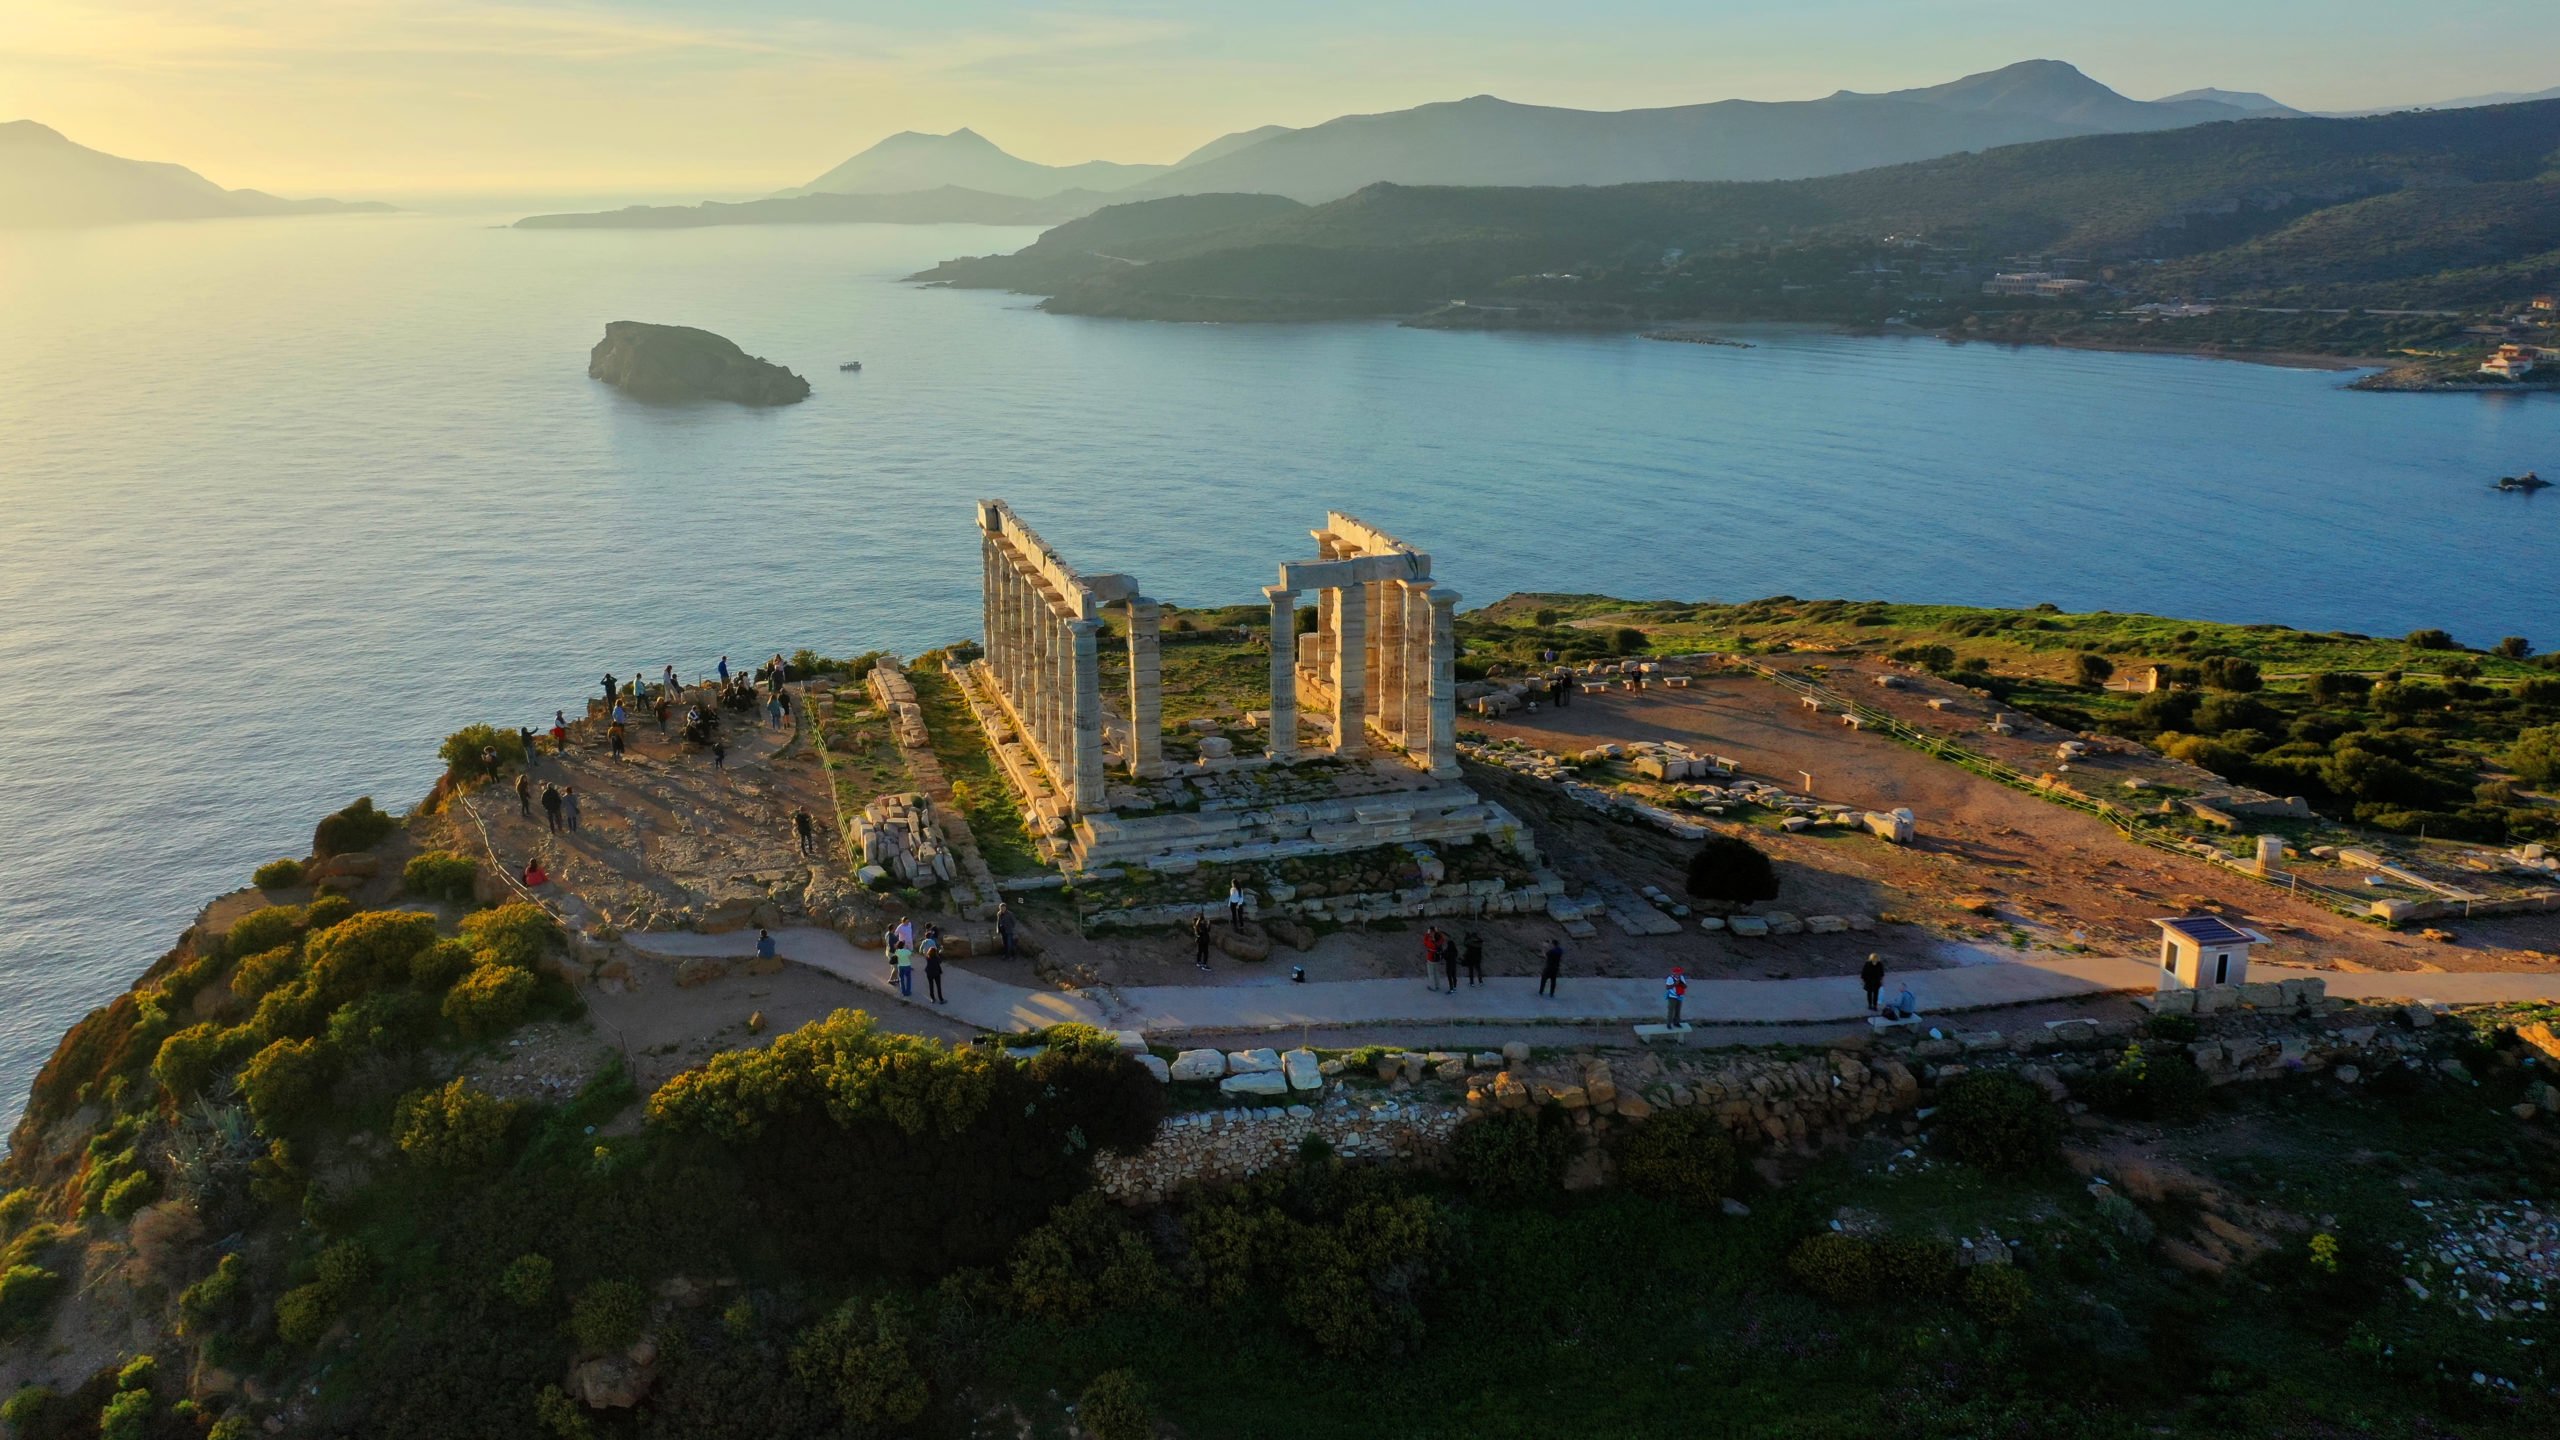 Enjoy A Glass Of Local Wine Watching The Breathtaking Sunset From Cape Sounio On The Sunset Cape Sounio Tour From Athens